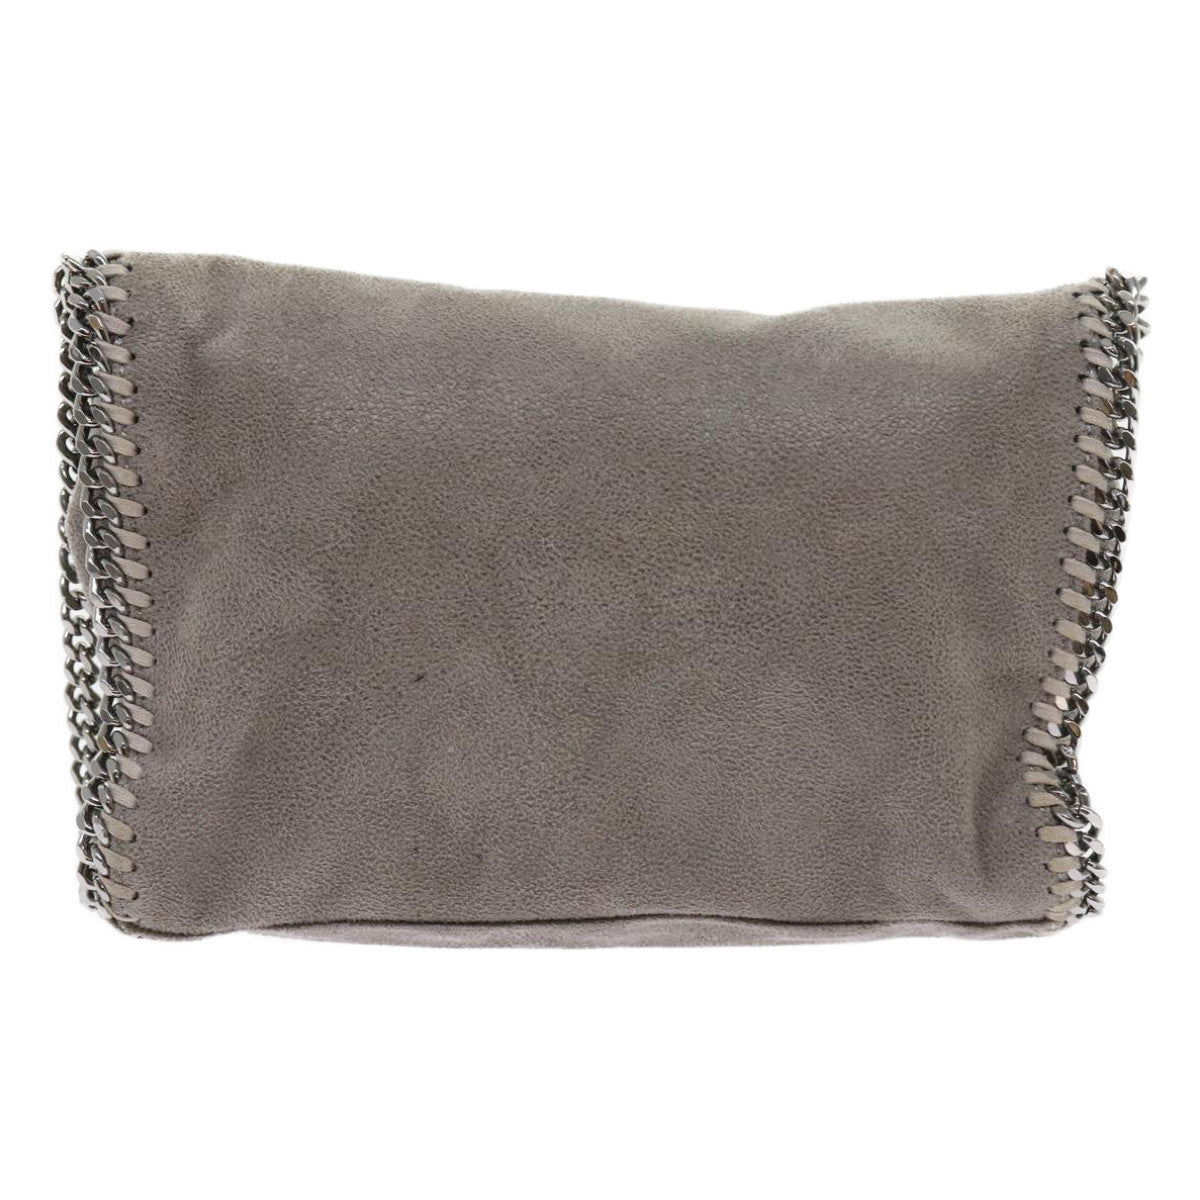 Stella MacCartney Chain Shoulder Bag Suede Gray 364519 Auth bs8624 - 0